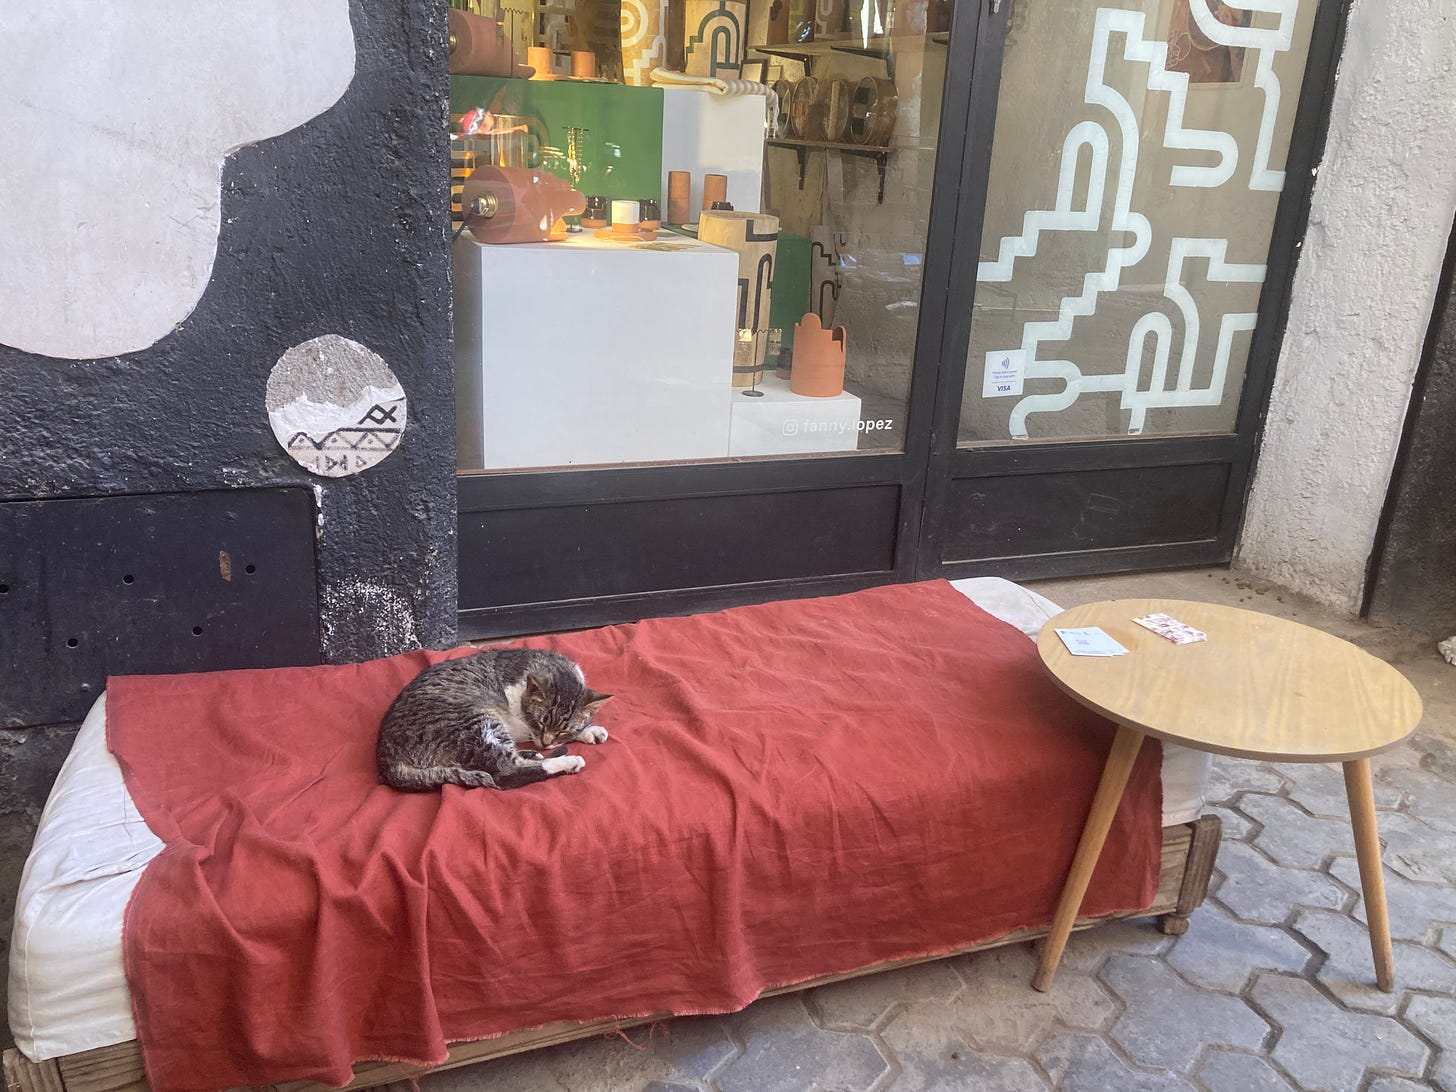 A tabby cat with white points sleeps on a red draped bench outside of a shop